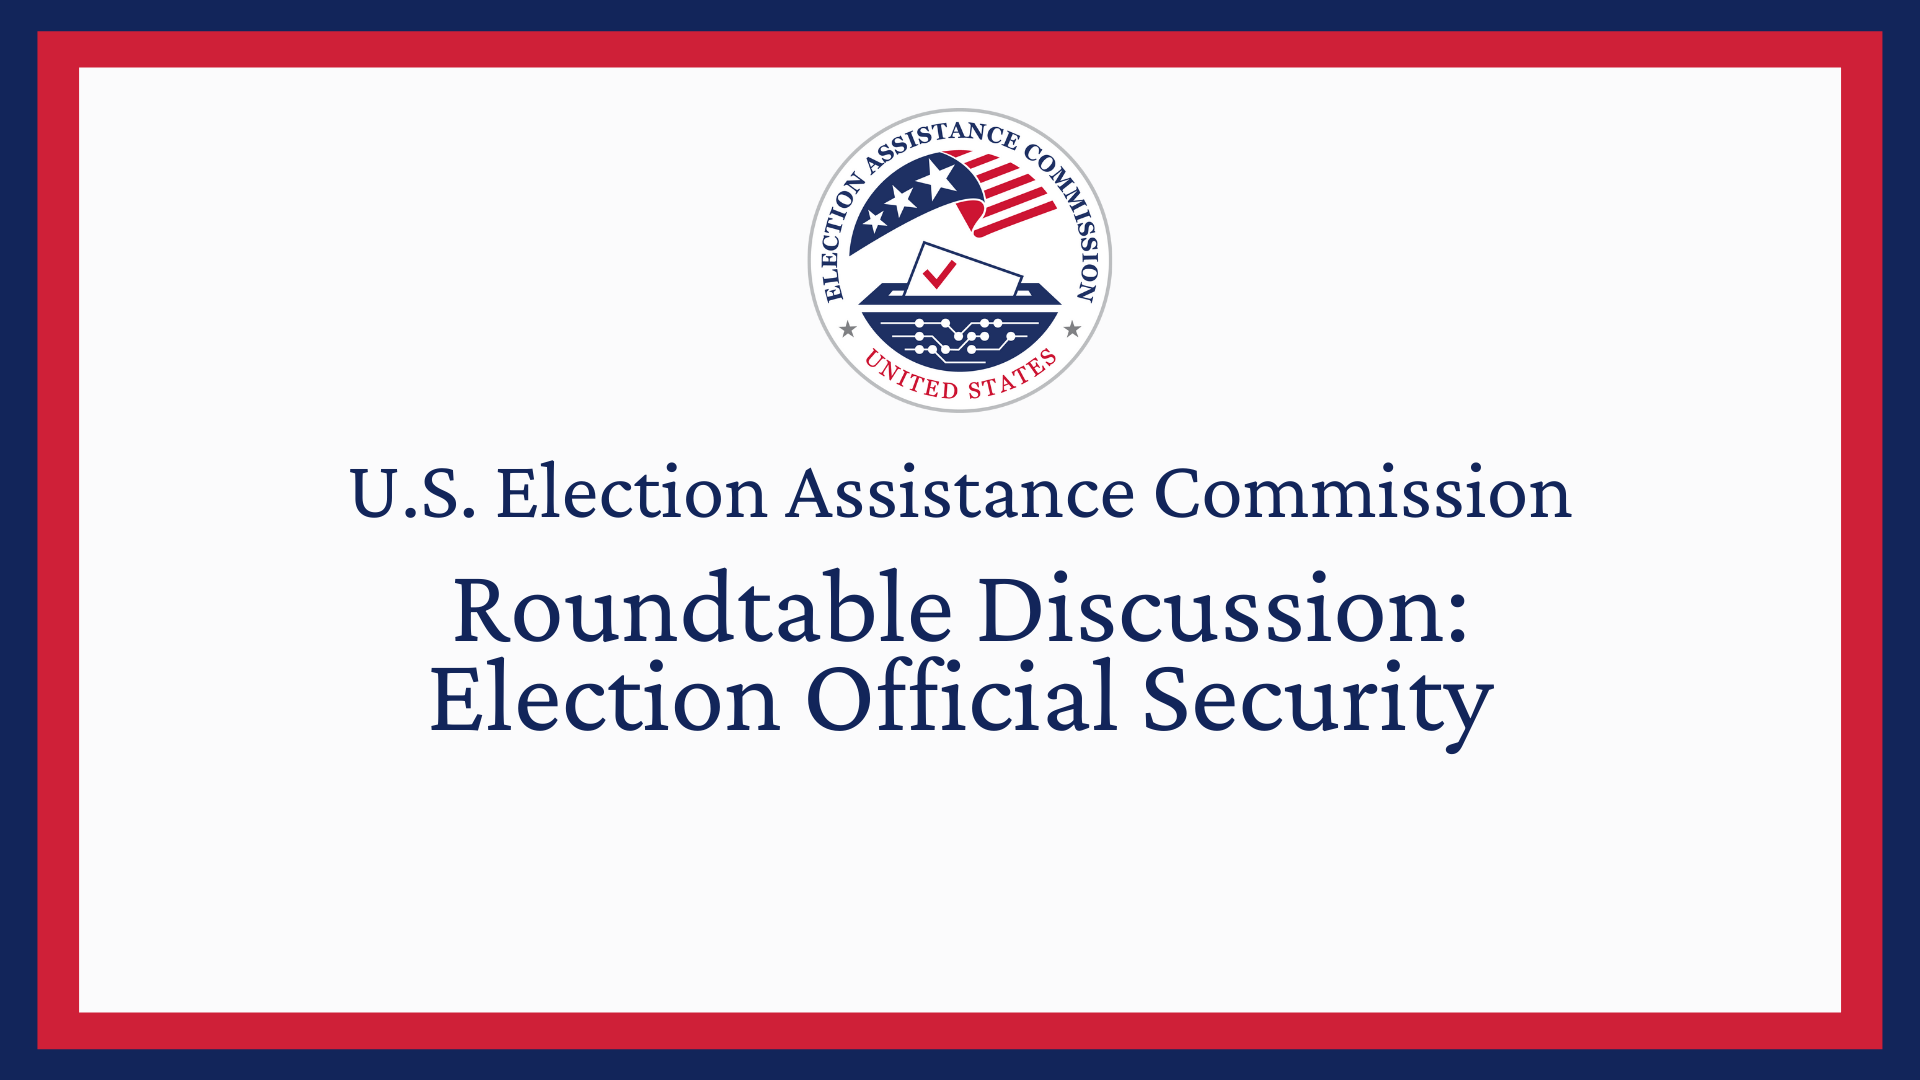 EAC seal with the text U.S. Election Assistance Commission, Roundtable Discussion: Election Official Security